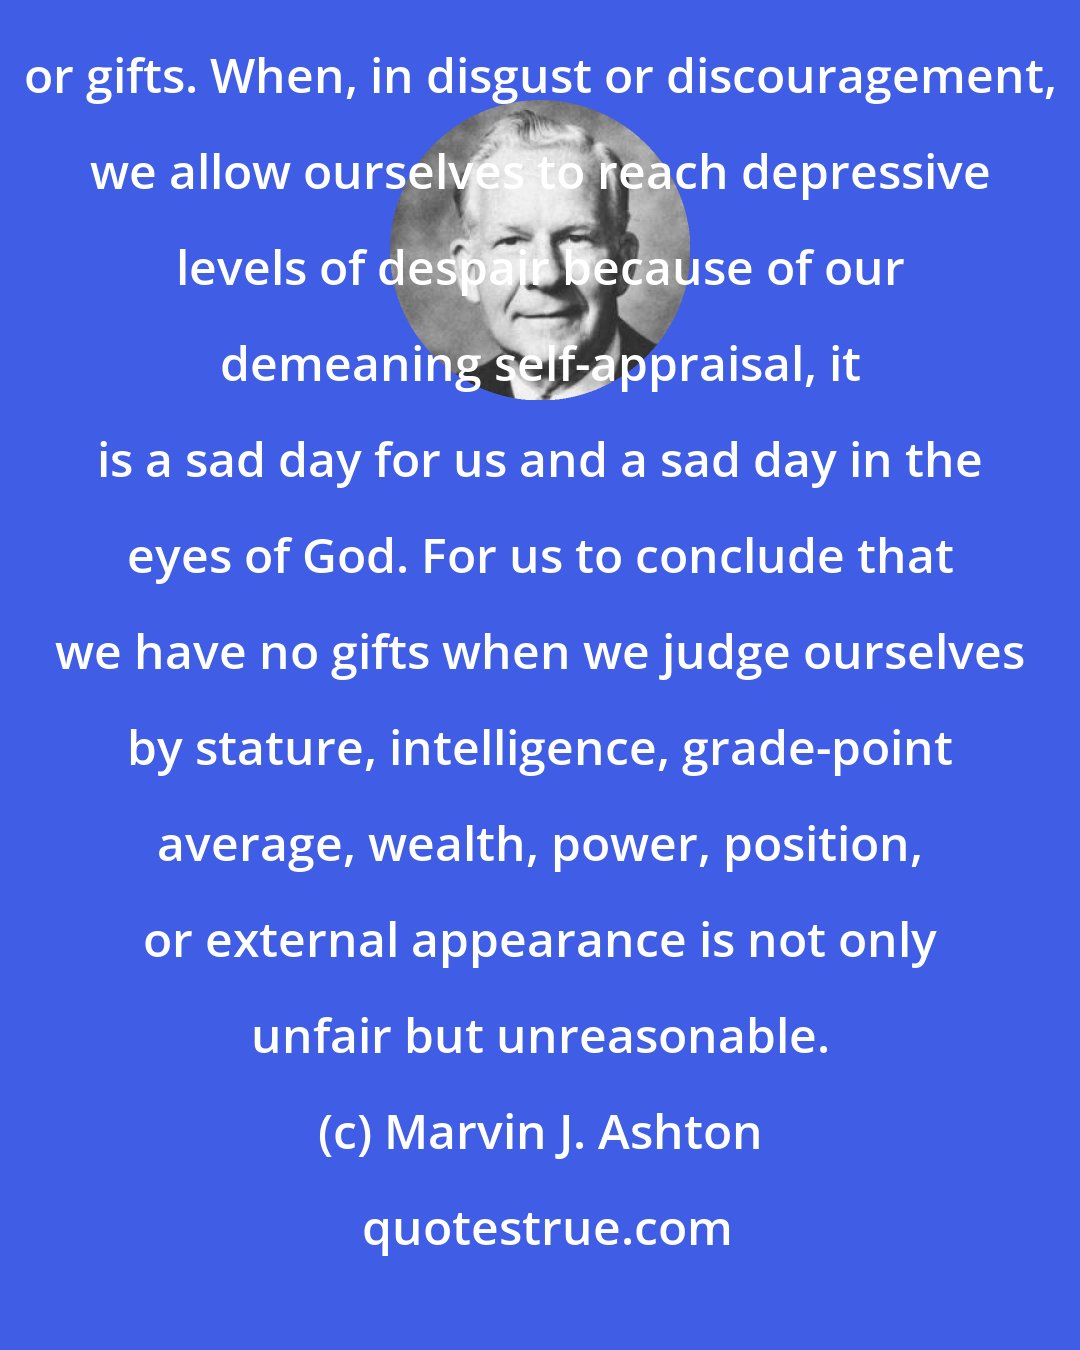 Marvin J. Ashton: One of the great tragedies of life, it seems to me, is when a person classifies himself as someone who has no talents or gifts. When, in disgust or discouragement, we allow ourselves to reach depressive levels of despair because of our demeaning self-appraisal, it is a sad day for us and a sad day in the eyes of God. For us to conclude that we have no gifts when we judge ourselves by stature, intelligence, grade-point average, wealth, power, position, or external appearance is not only unfair but unreasonable.